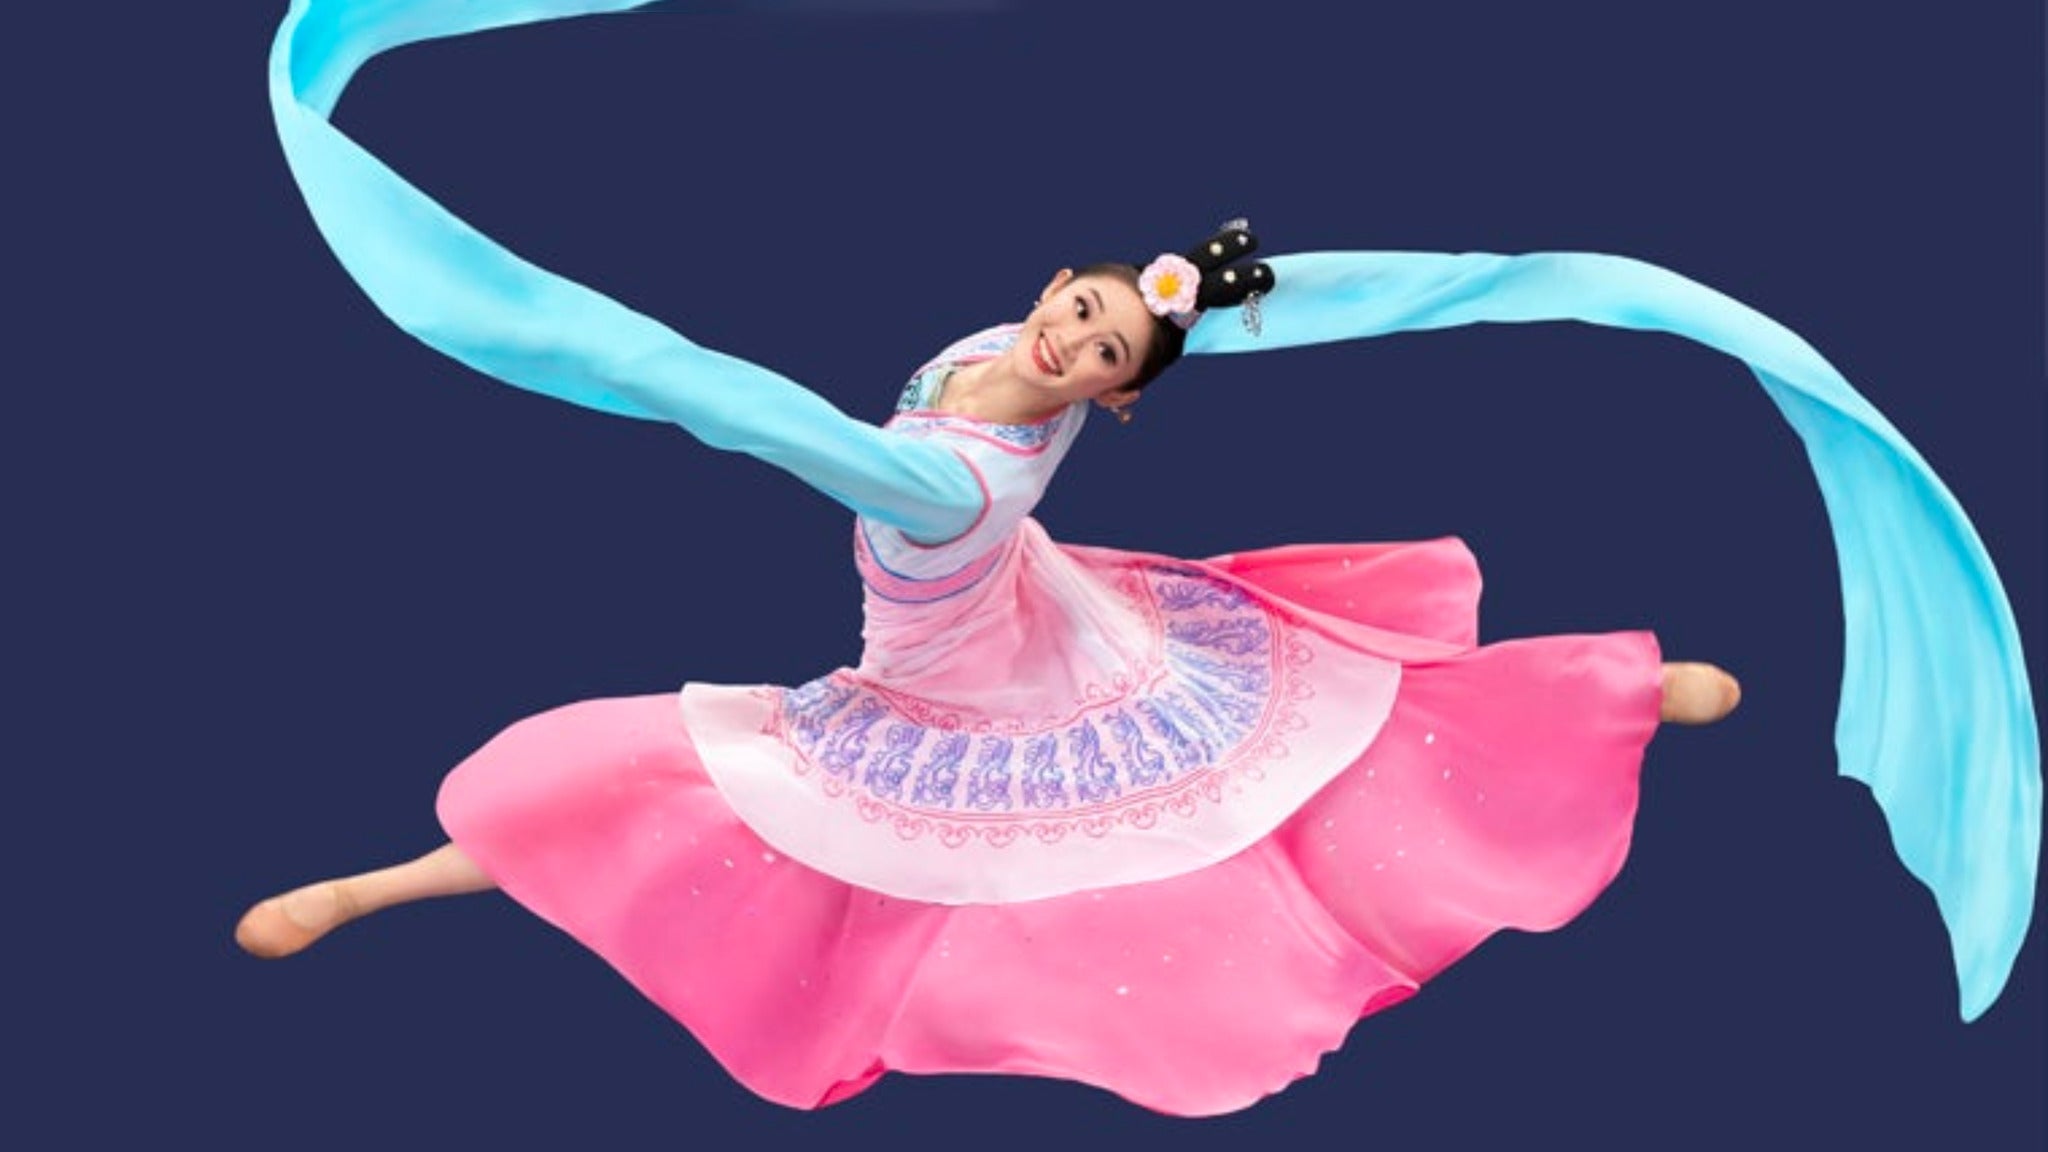 Shen Yun Performing Arts at Buell Theatre - Denver, CO 80204